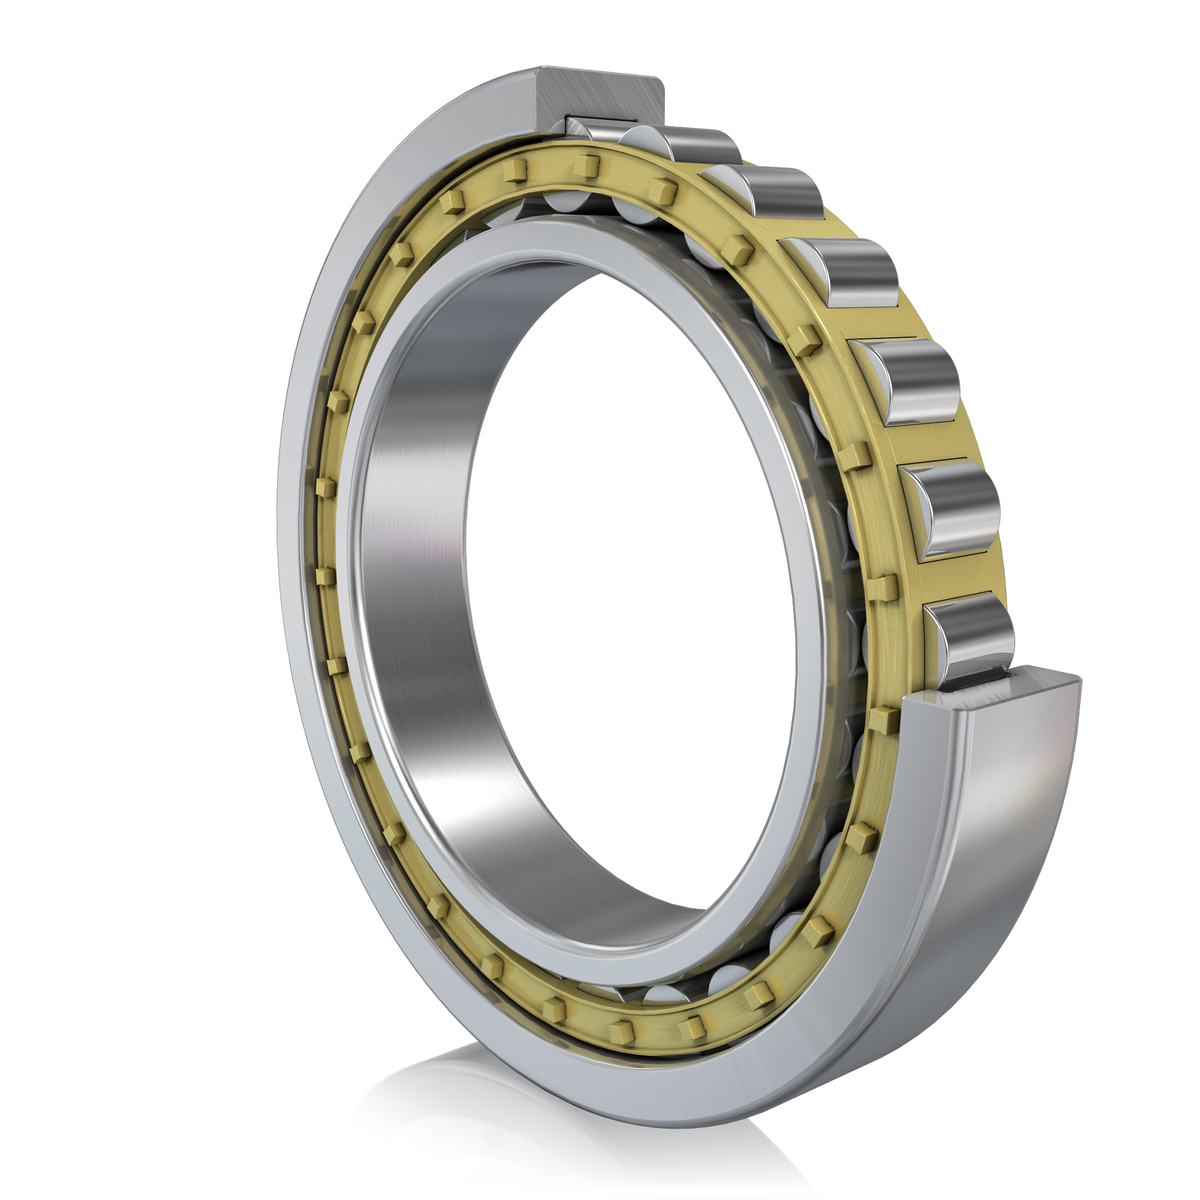 Cylindrical Roller Bearing NU2..-M1, with Cage, Single Row, Non-Locating Bearing, Type NU